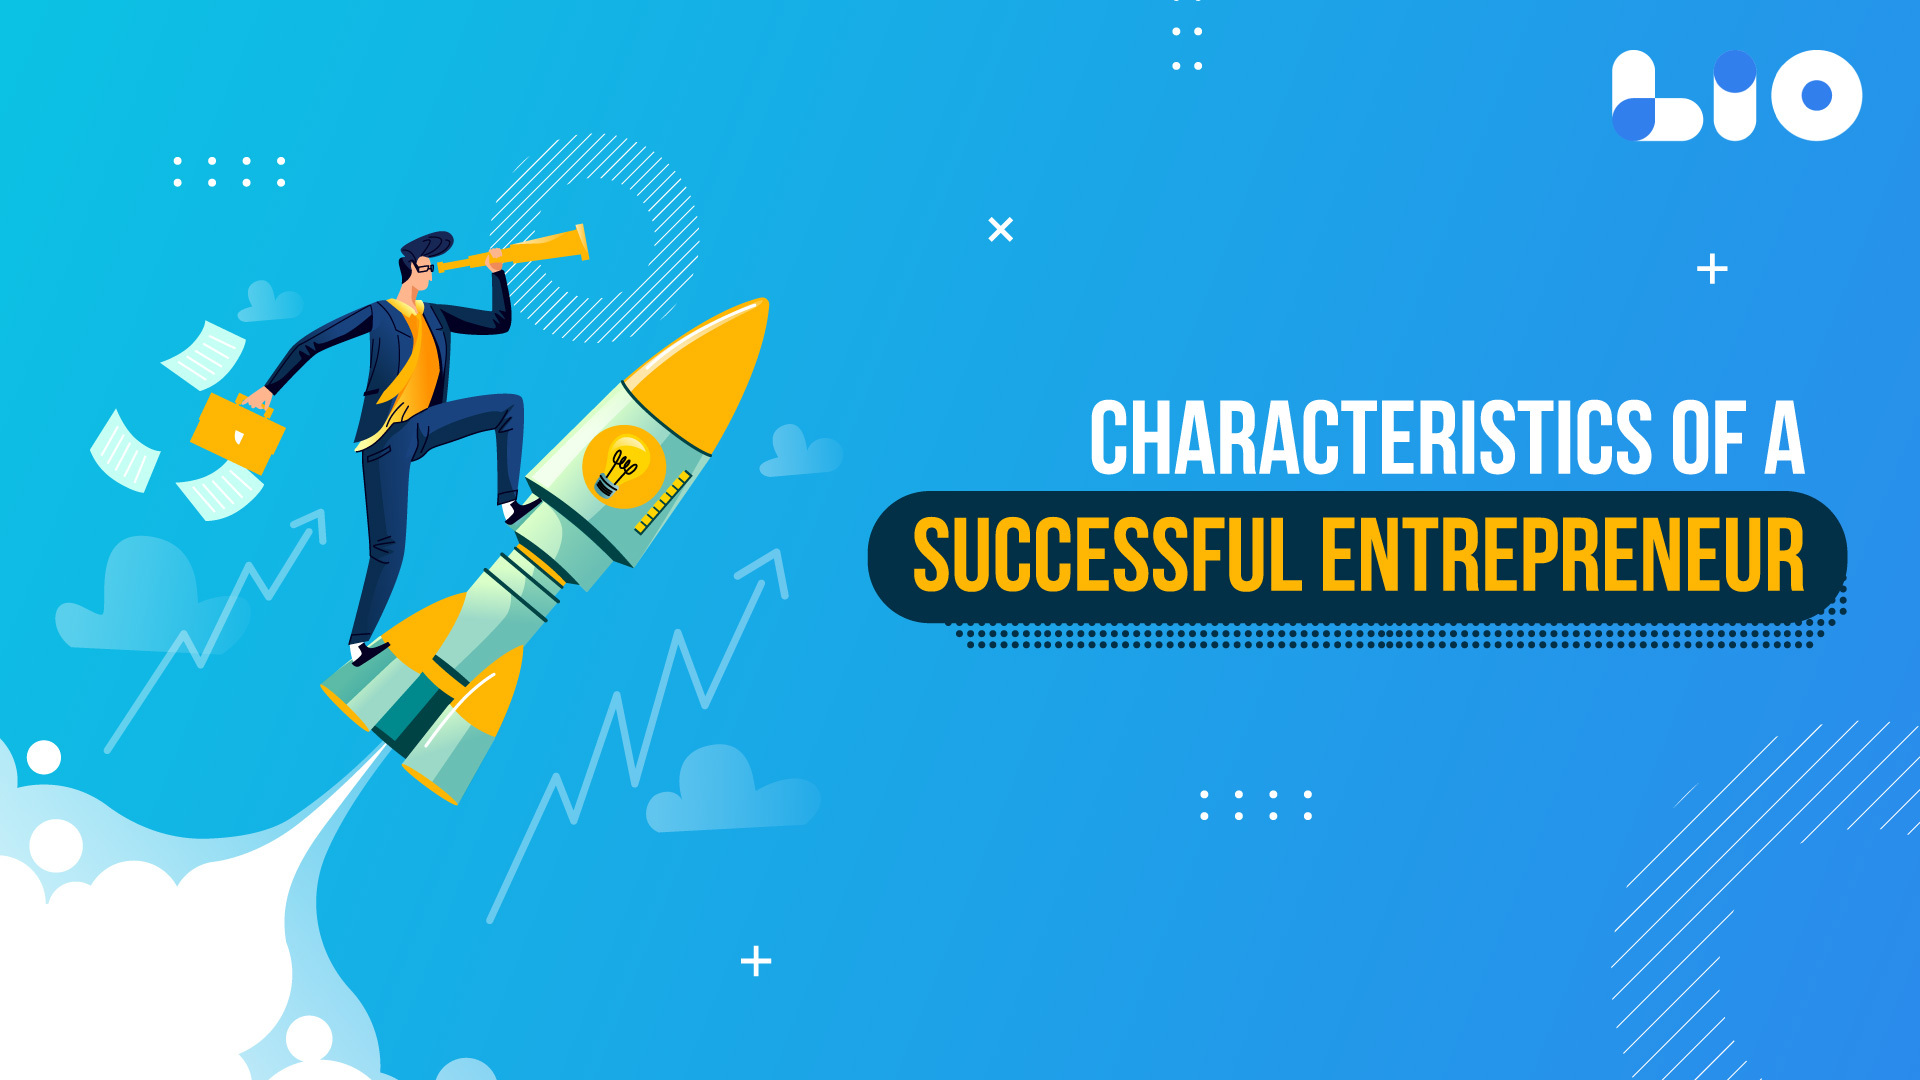 Characteristics of a Successful Entrepreneur: What Makes Them Stand Out?